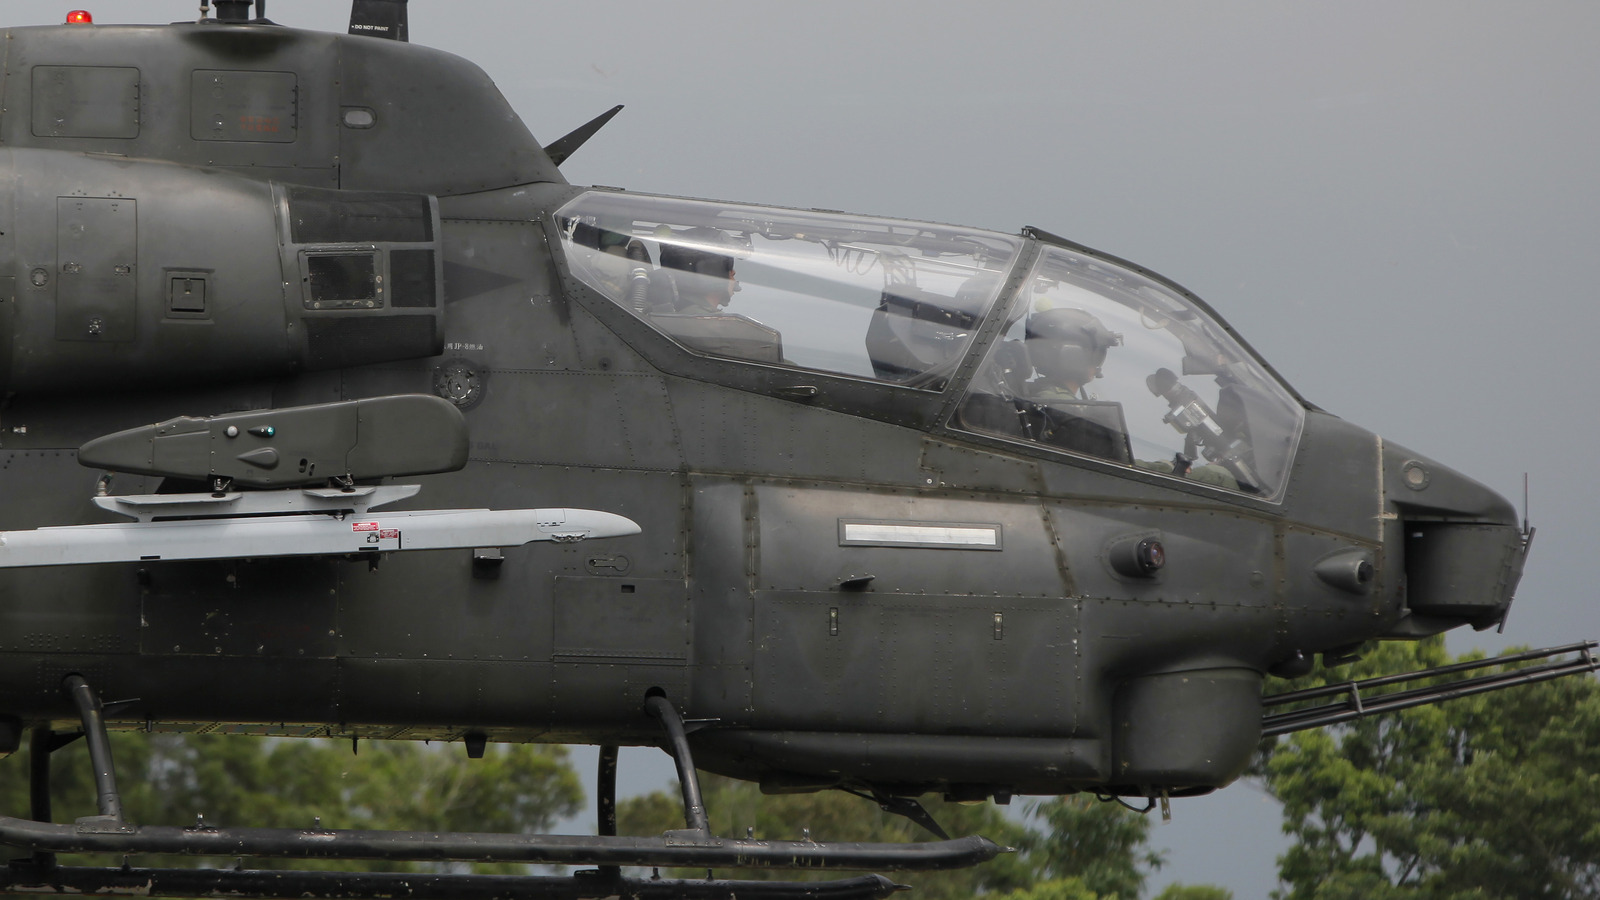 Everything To Know About The Bell AH-1 SuperCobra Attack Helicopter